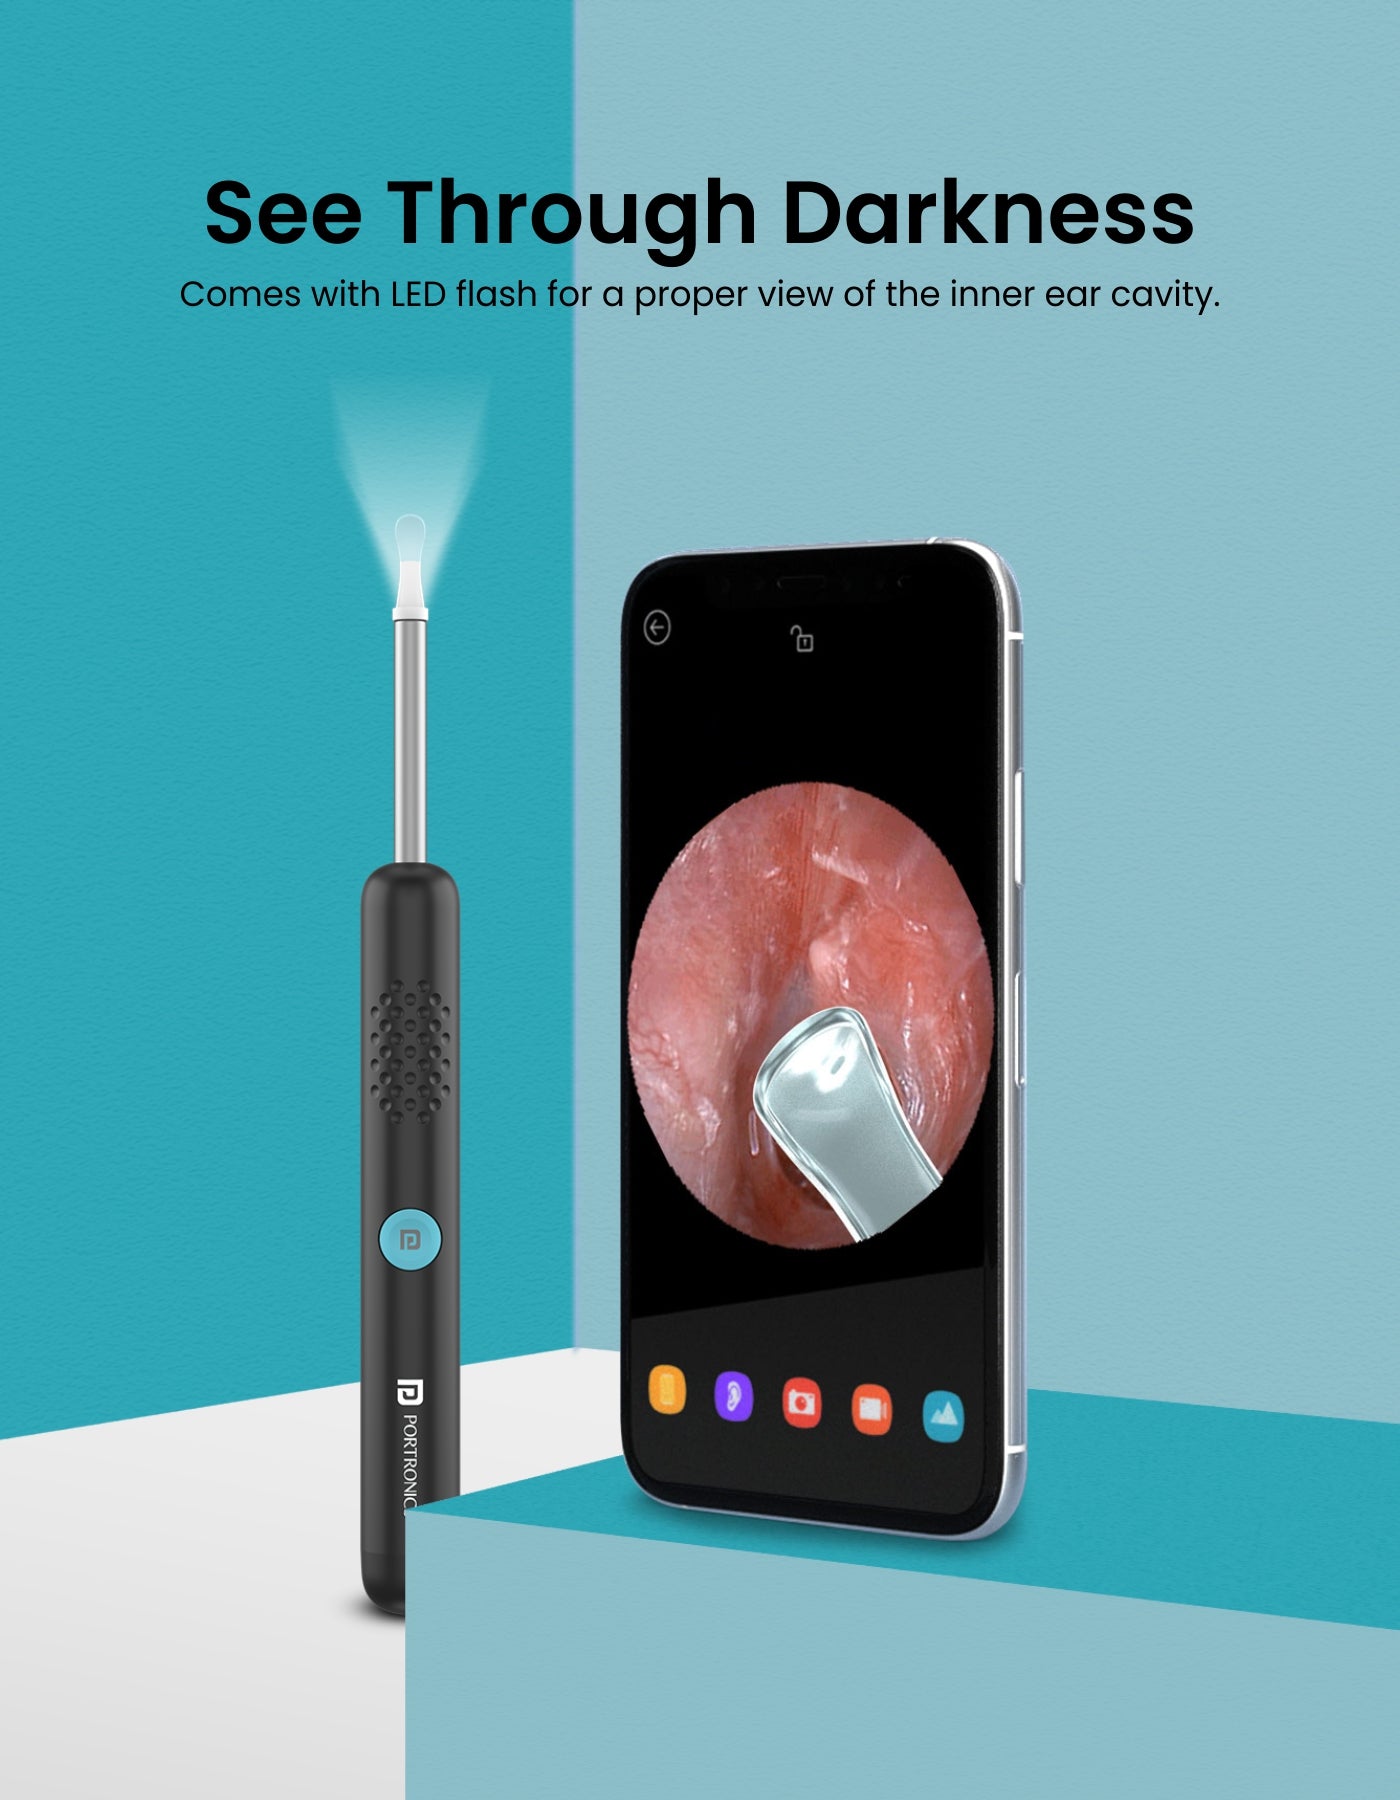 Portronics Cleansify Ear cleaning Camera With Full HD Lens And LED light